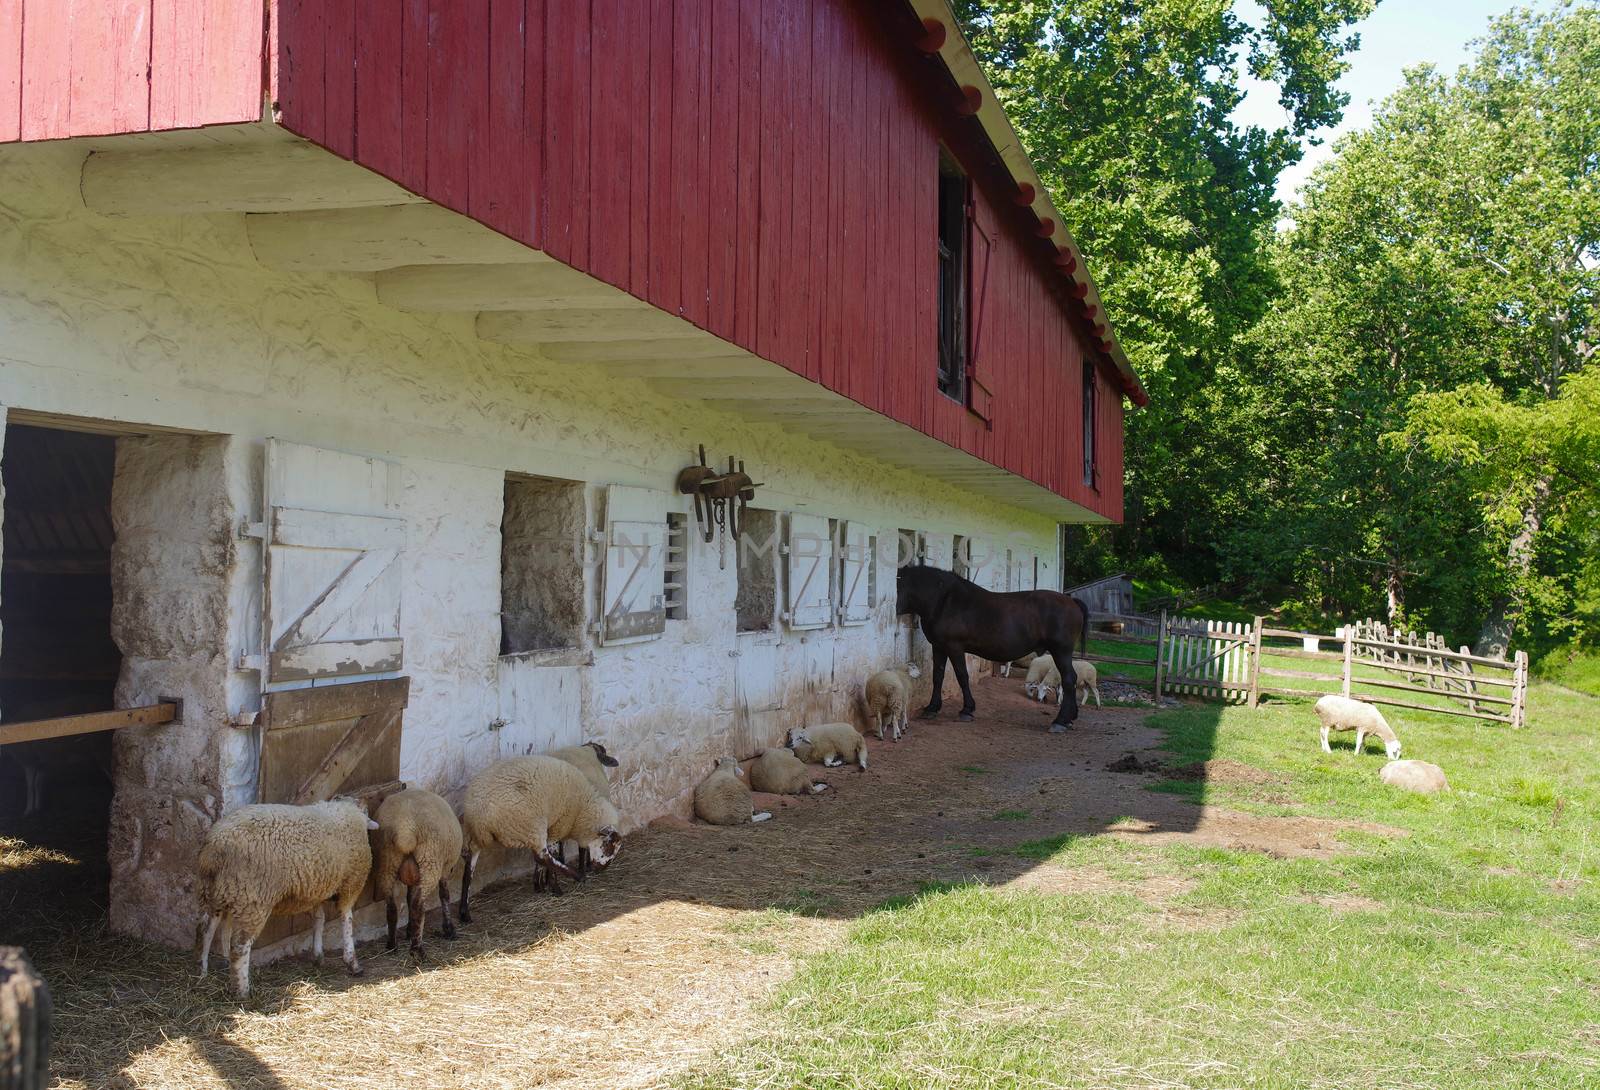 Horse and sheep rest in shade on historic colonial american farm by marysalen